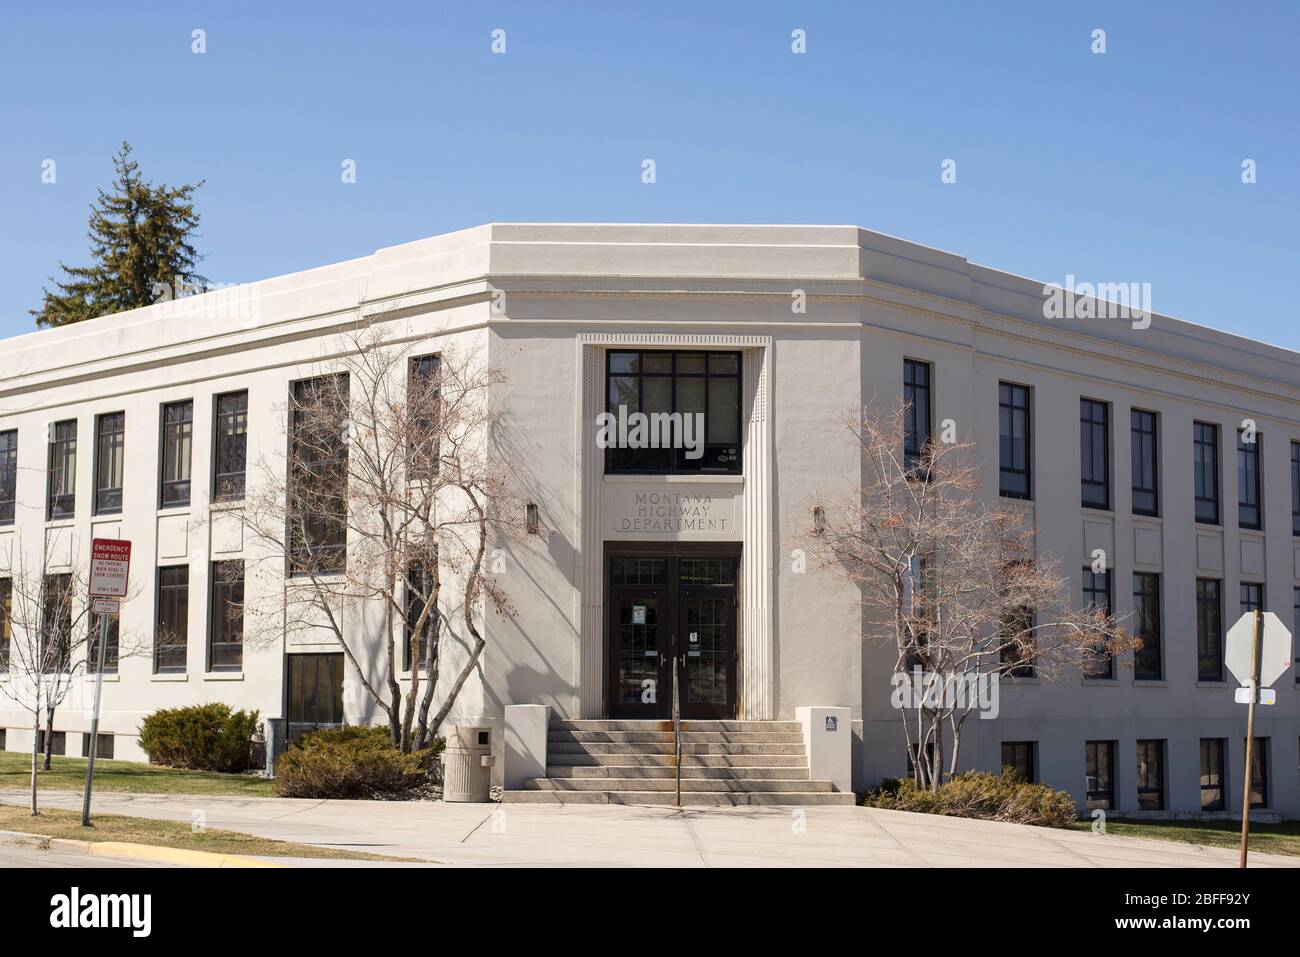 Helena, Montana - April 8, 2020: Department of Justice Motor Vehicle Division office building in downtown Helena's Capitol Square. Highway Patrol and Stock Photo